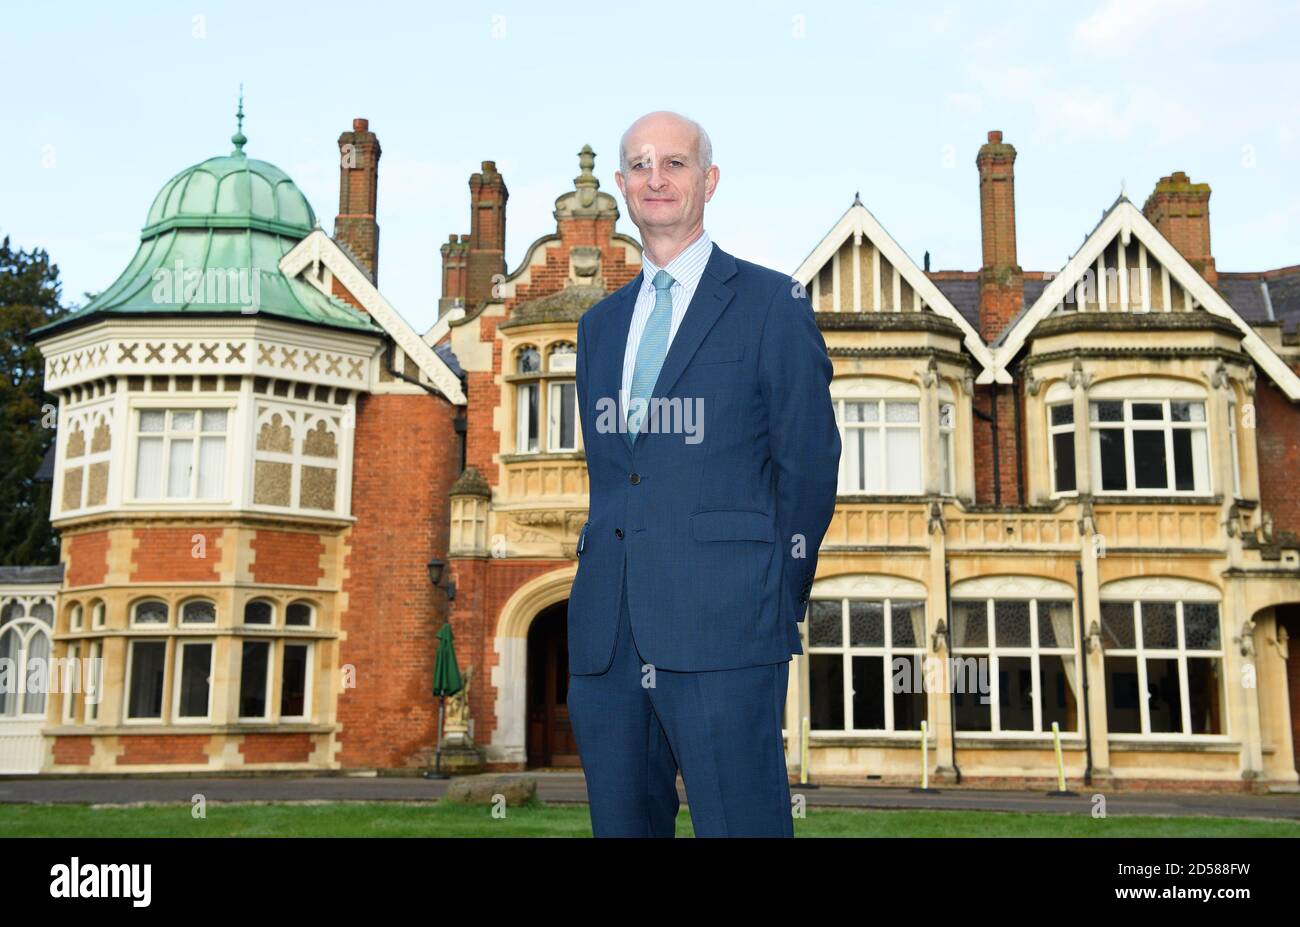 Iain Standen, Bletchley Park CEO outside Bletchley Park in Milton Keynes, to announce the company's ??1 million donation to Bletchley Park to support its work for the next two years after the charity and museum said it had lost 95% of its income because of the coronavirus pandemic. Stock Photo